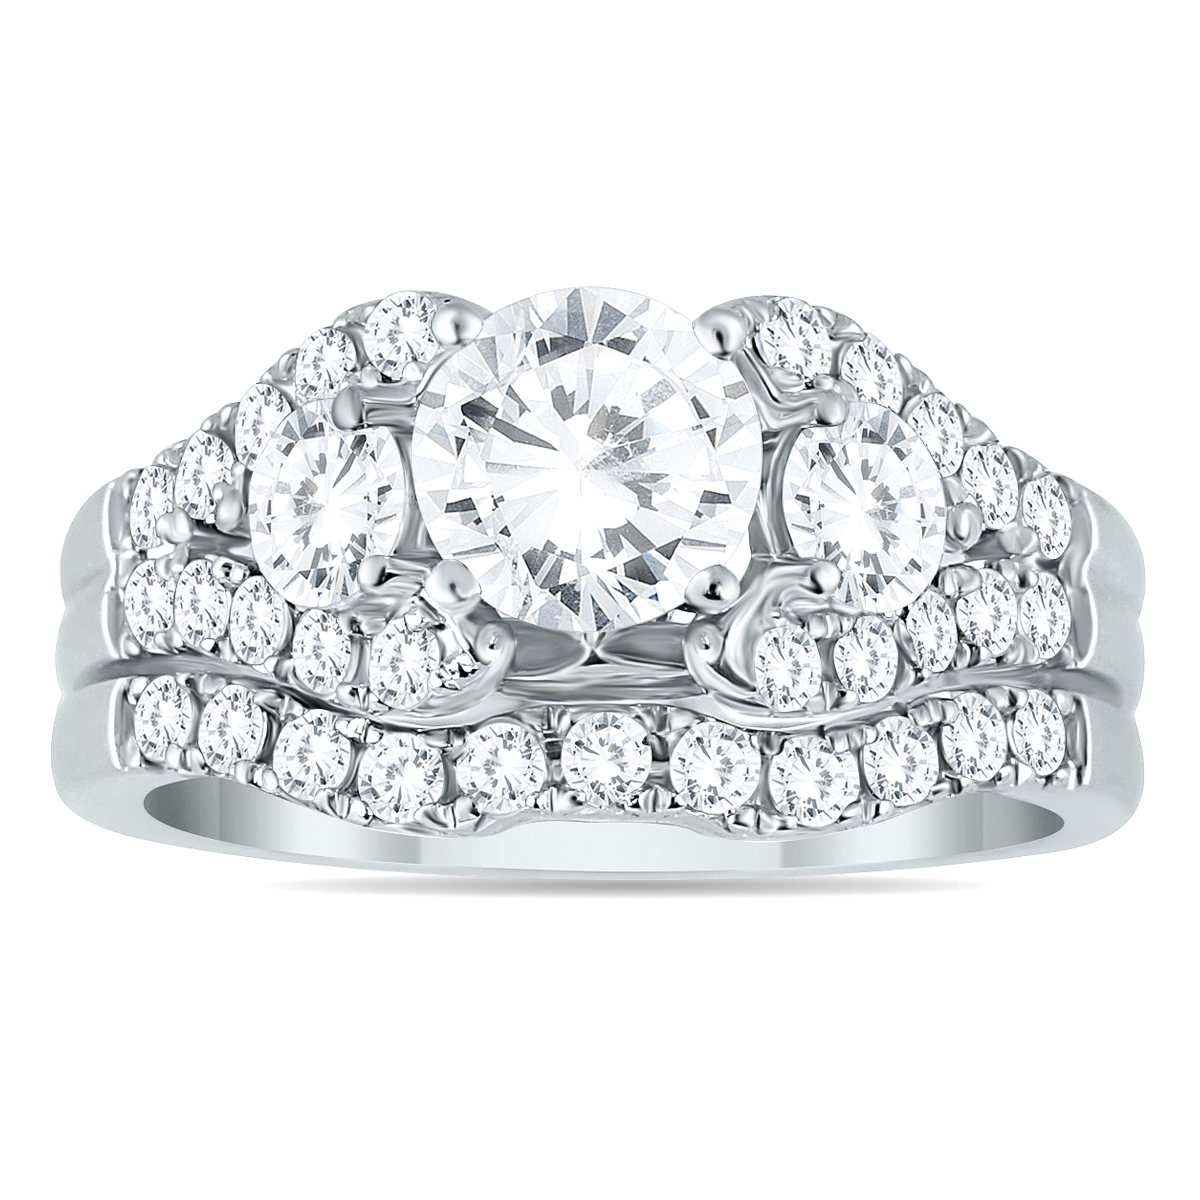 Image of AGS Certified 2 1/5 Carat Diamond Bridal Set in 14K White Gold (H-I Color I1-I2 Clarity)